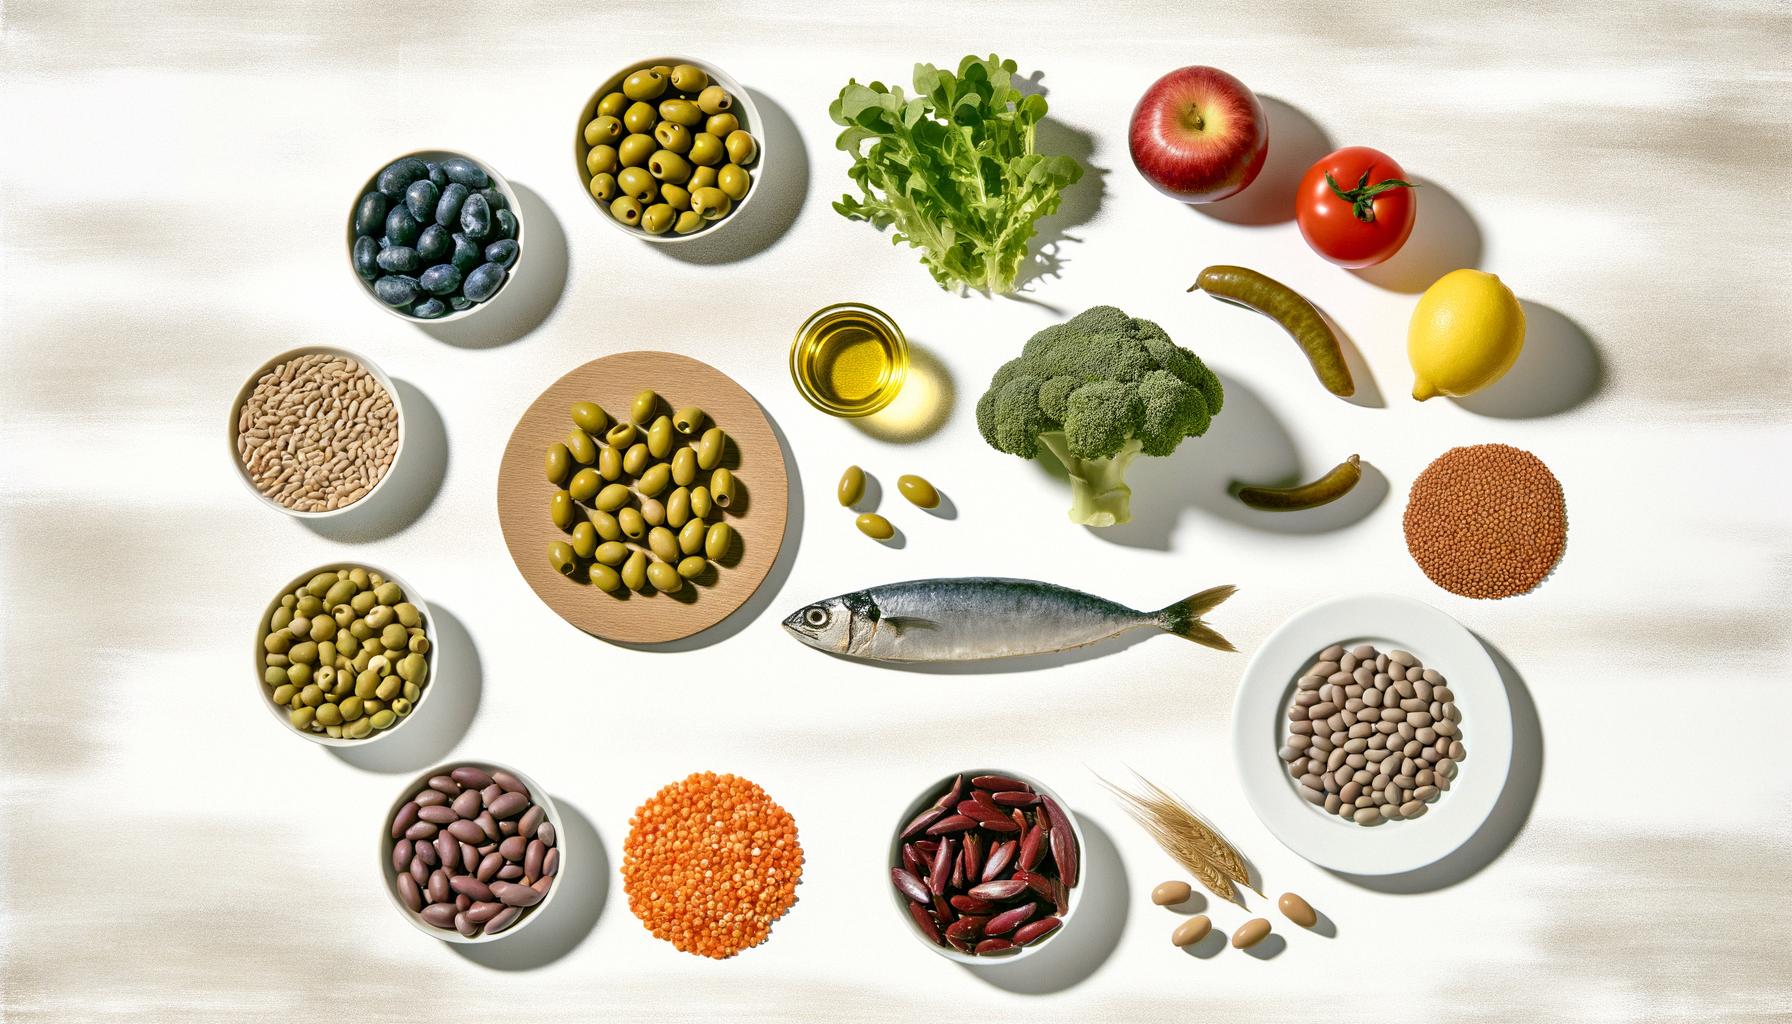 Historical and modern relevance of the Mediterranean diet's health benefits.